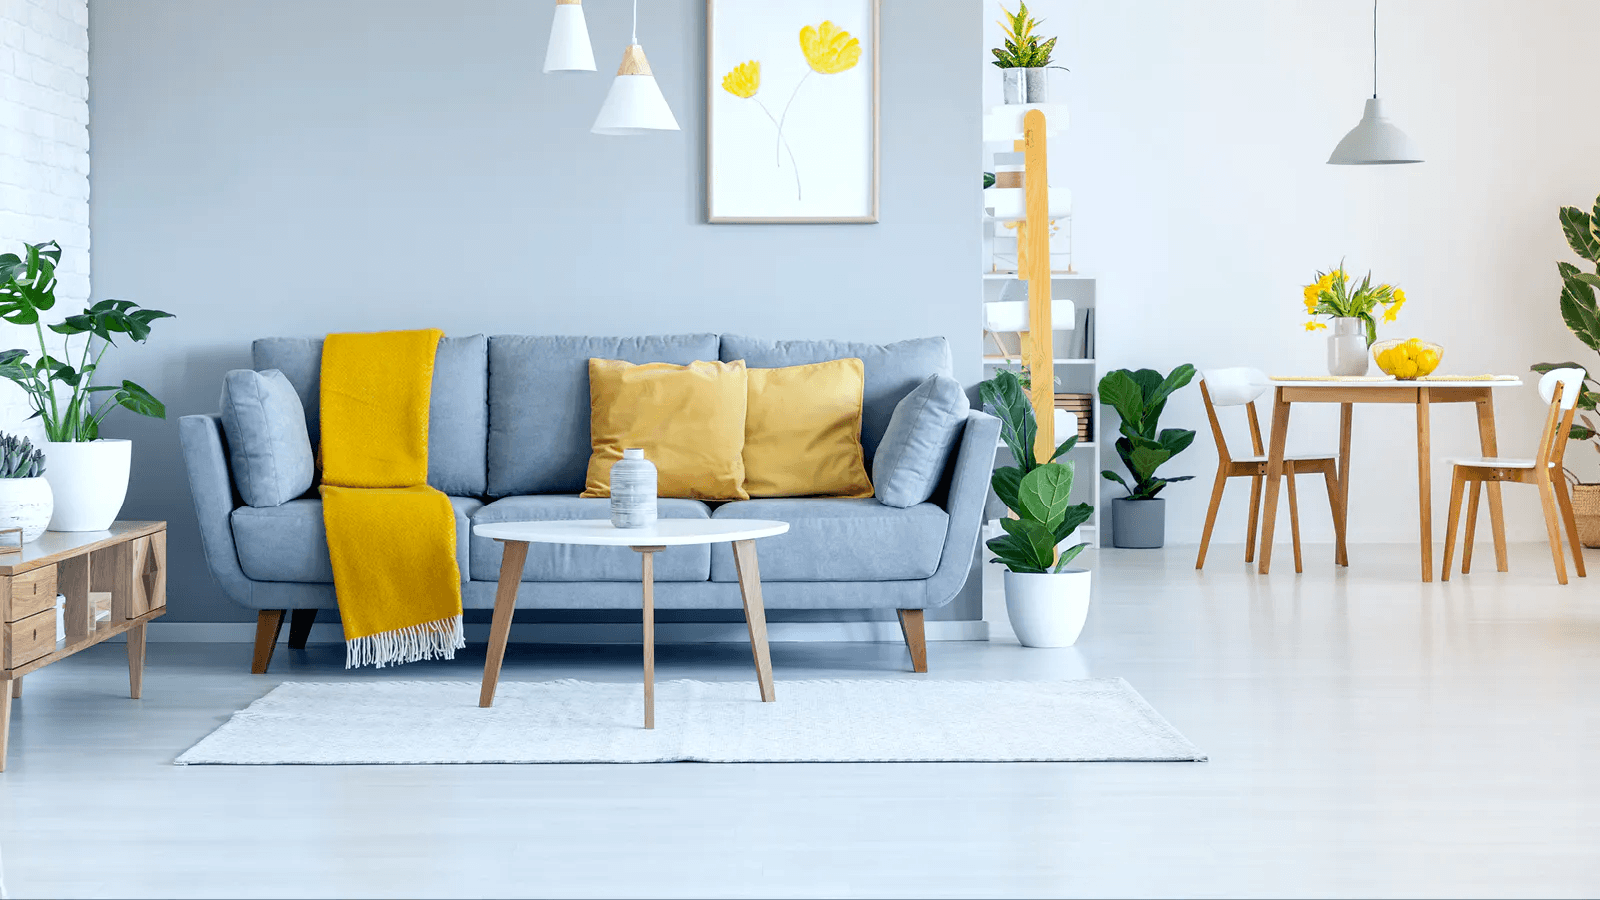 Best Interior Design Trends of 2022 That Will Give Your Home A Perfect Look